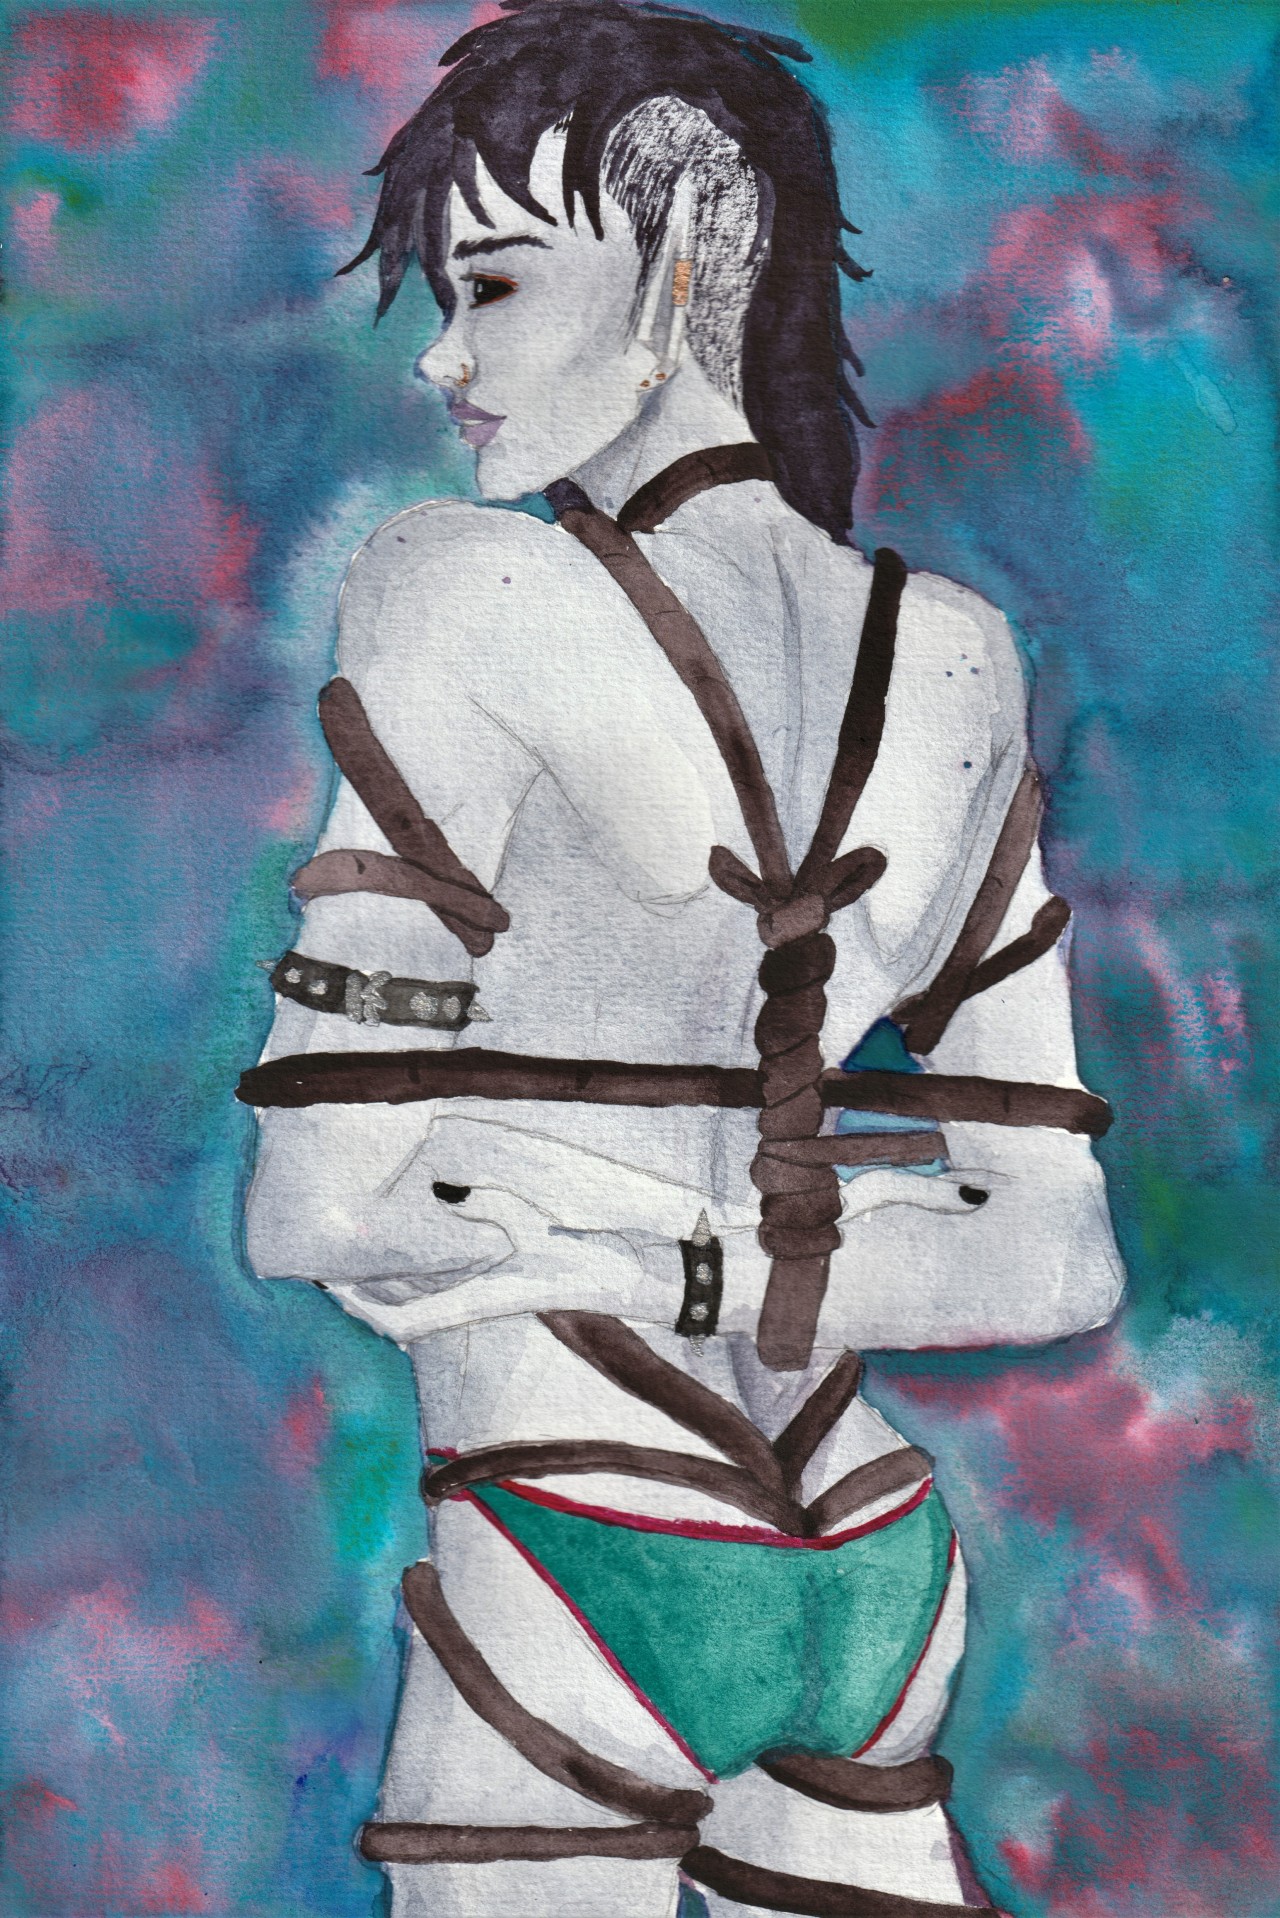 There was only one way I could go with the pinup for Adumbratus, he had to have shibari because reasons #watercolor#painting#art#shibari#pinup#illustration#my oc